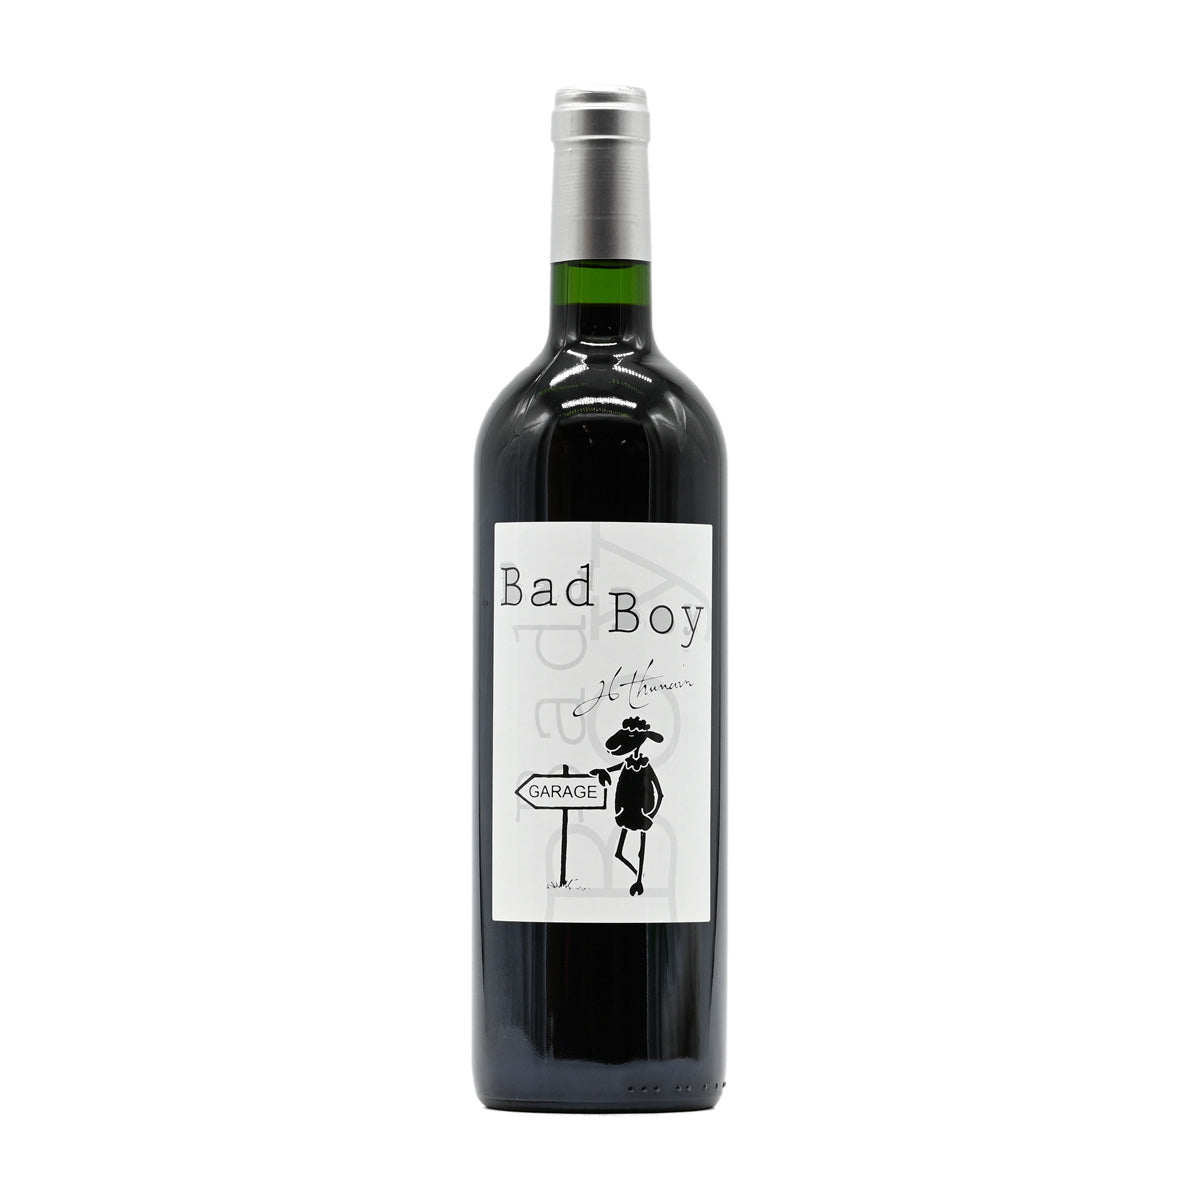 Bad Boy Garage 2018, 750ml French red wine, made from Merlot; from Bordeaux, France – GDV Fine Wines, Hong Kong